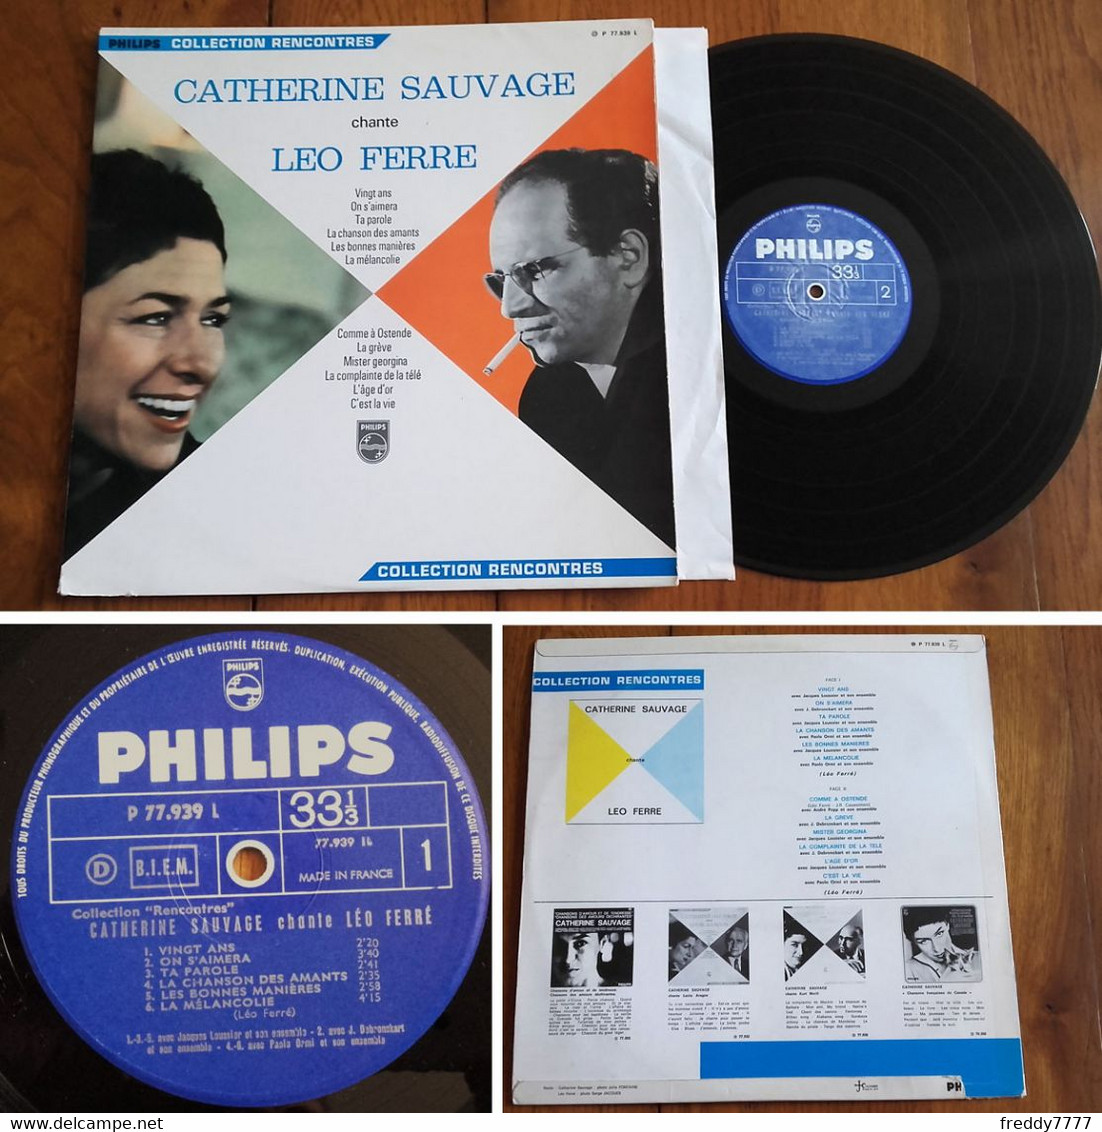 RARE French LP 33t RPM BIEM (12") CATHERINE SAUVAGE Chante LEO FERRE (1966) - Collector's Editions